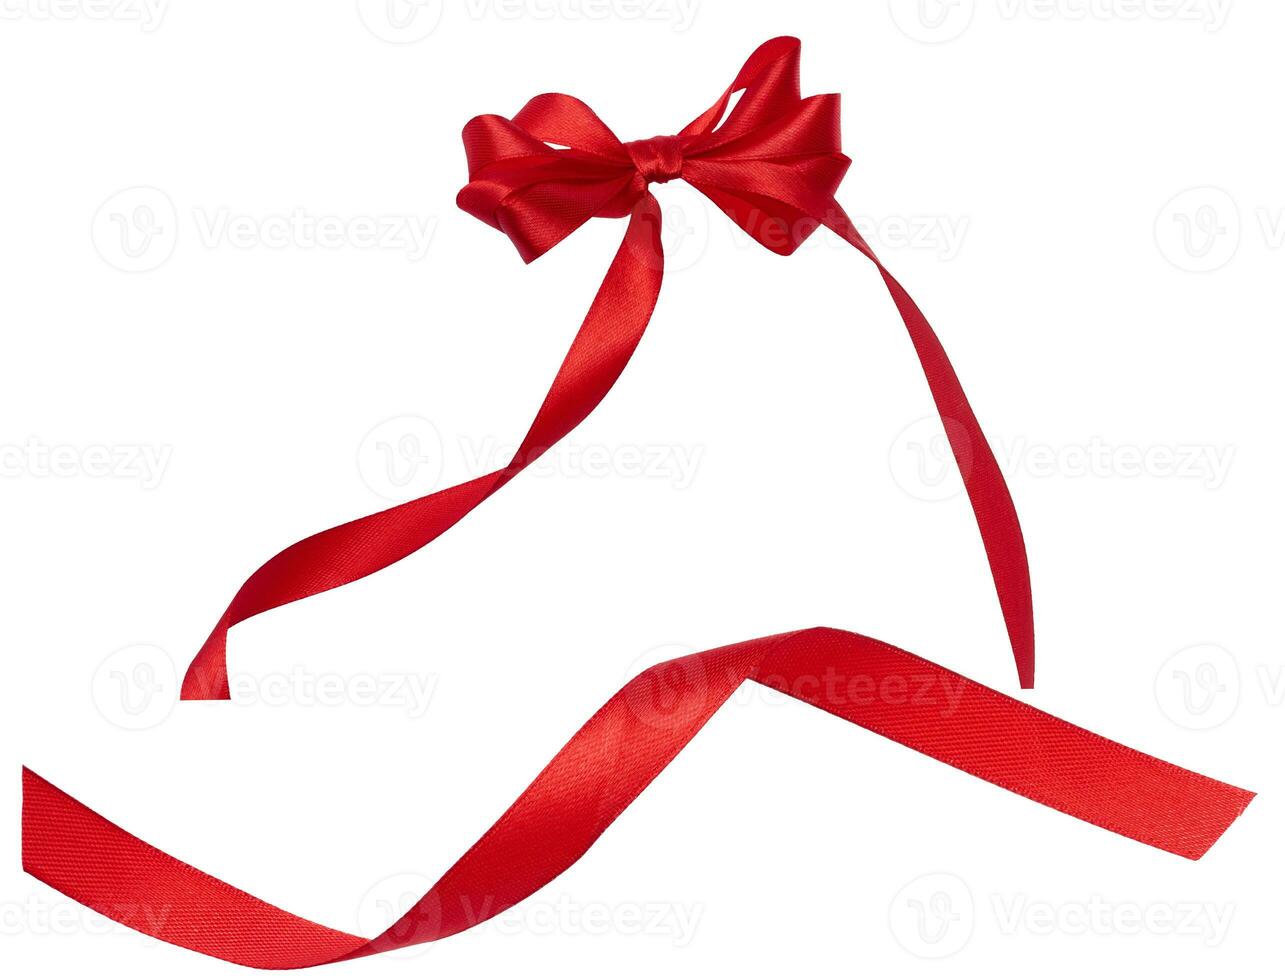 Twisted red satin ribbon, bow. Decor for gift wrapping photo